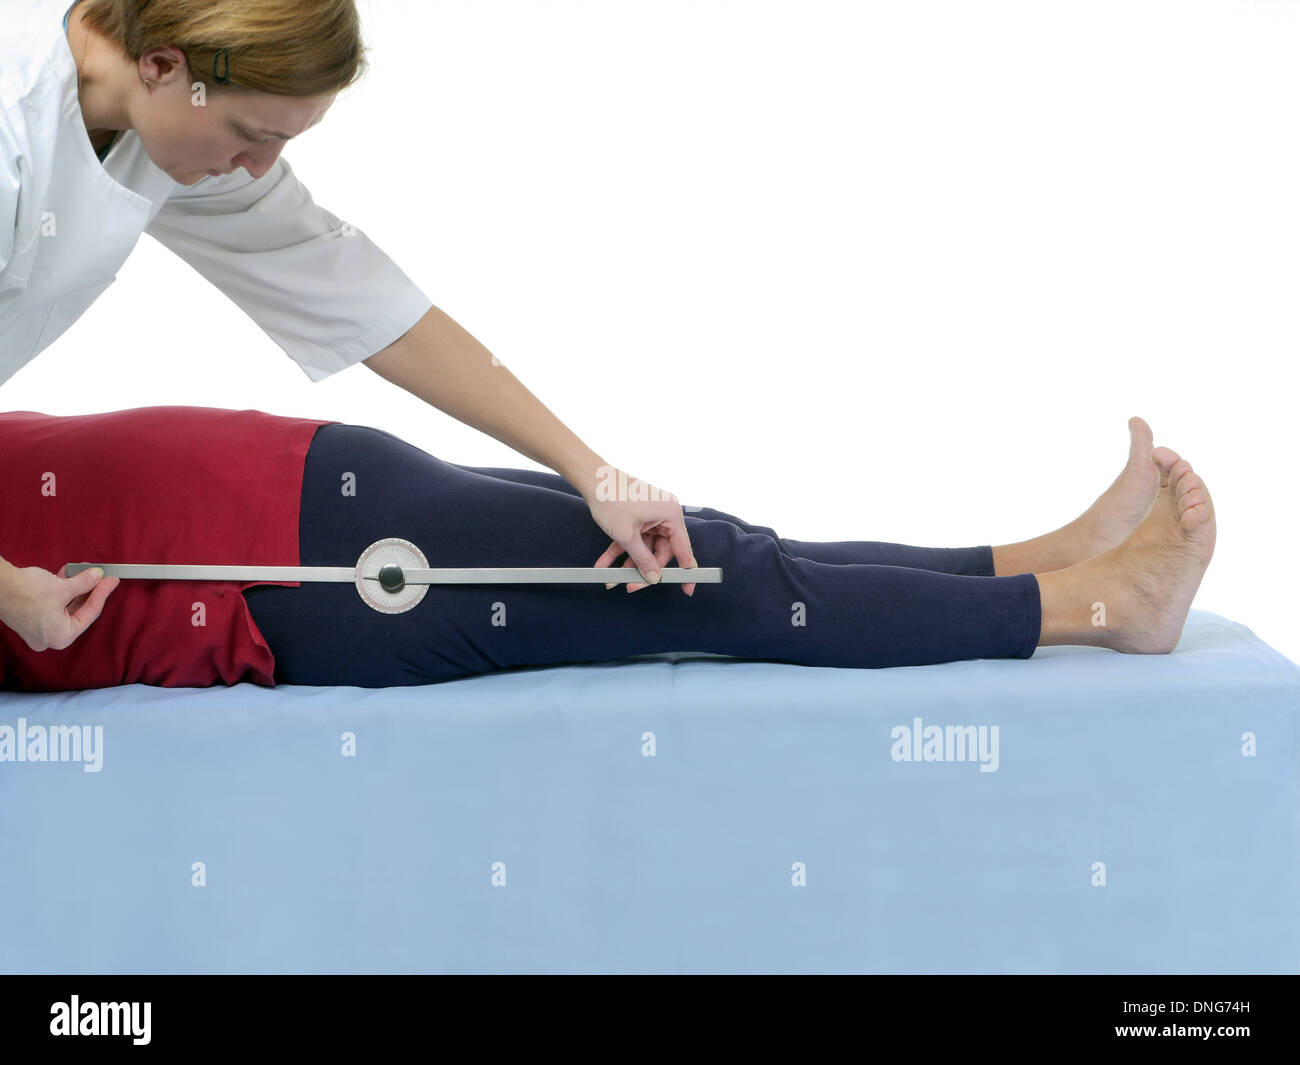 Physiotherapist measuring active range of motion of older patient's lower limb using manual goniometer Stock Photo